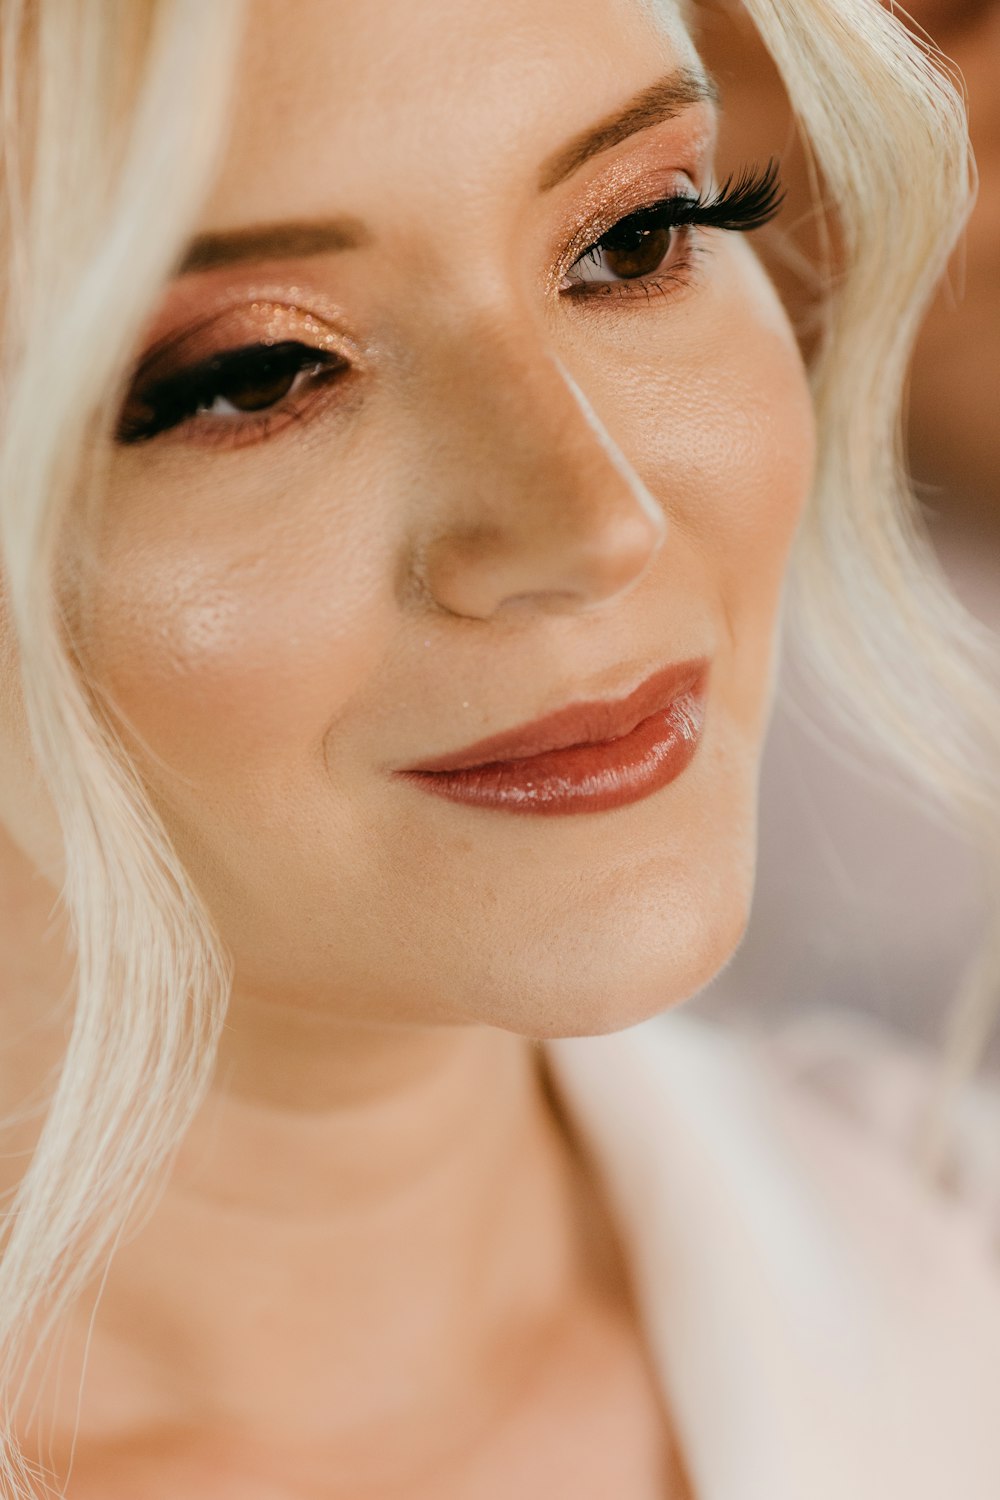 a close up of a woman with blonde hair